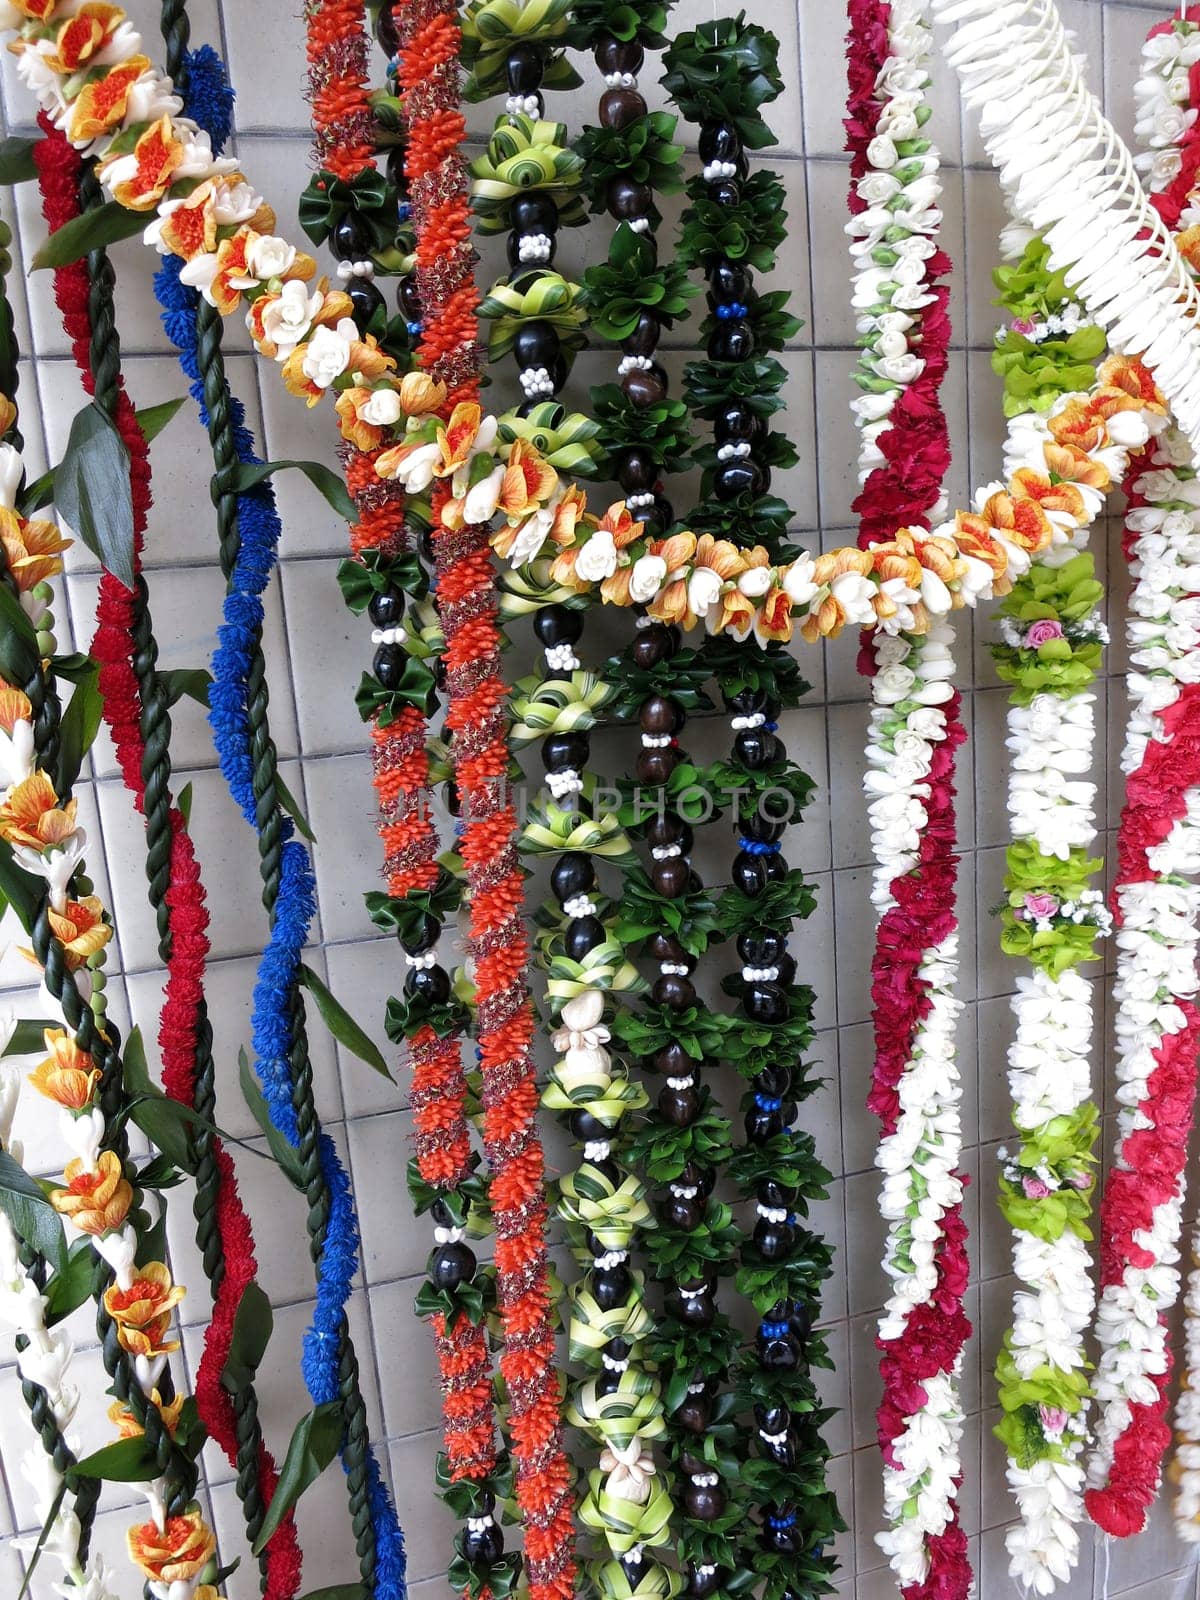 Rows of Colorful Hawaiian flower lei for sale on outdoor wall on Oahu.